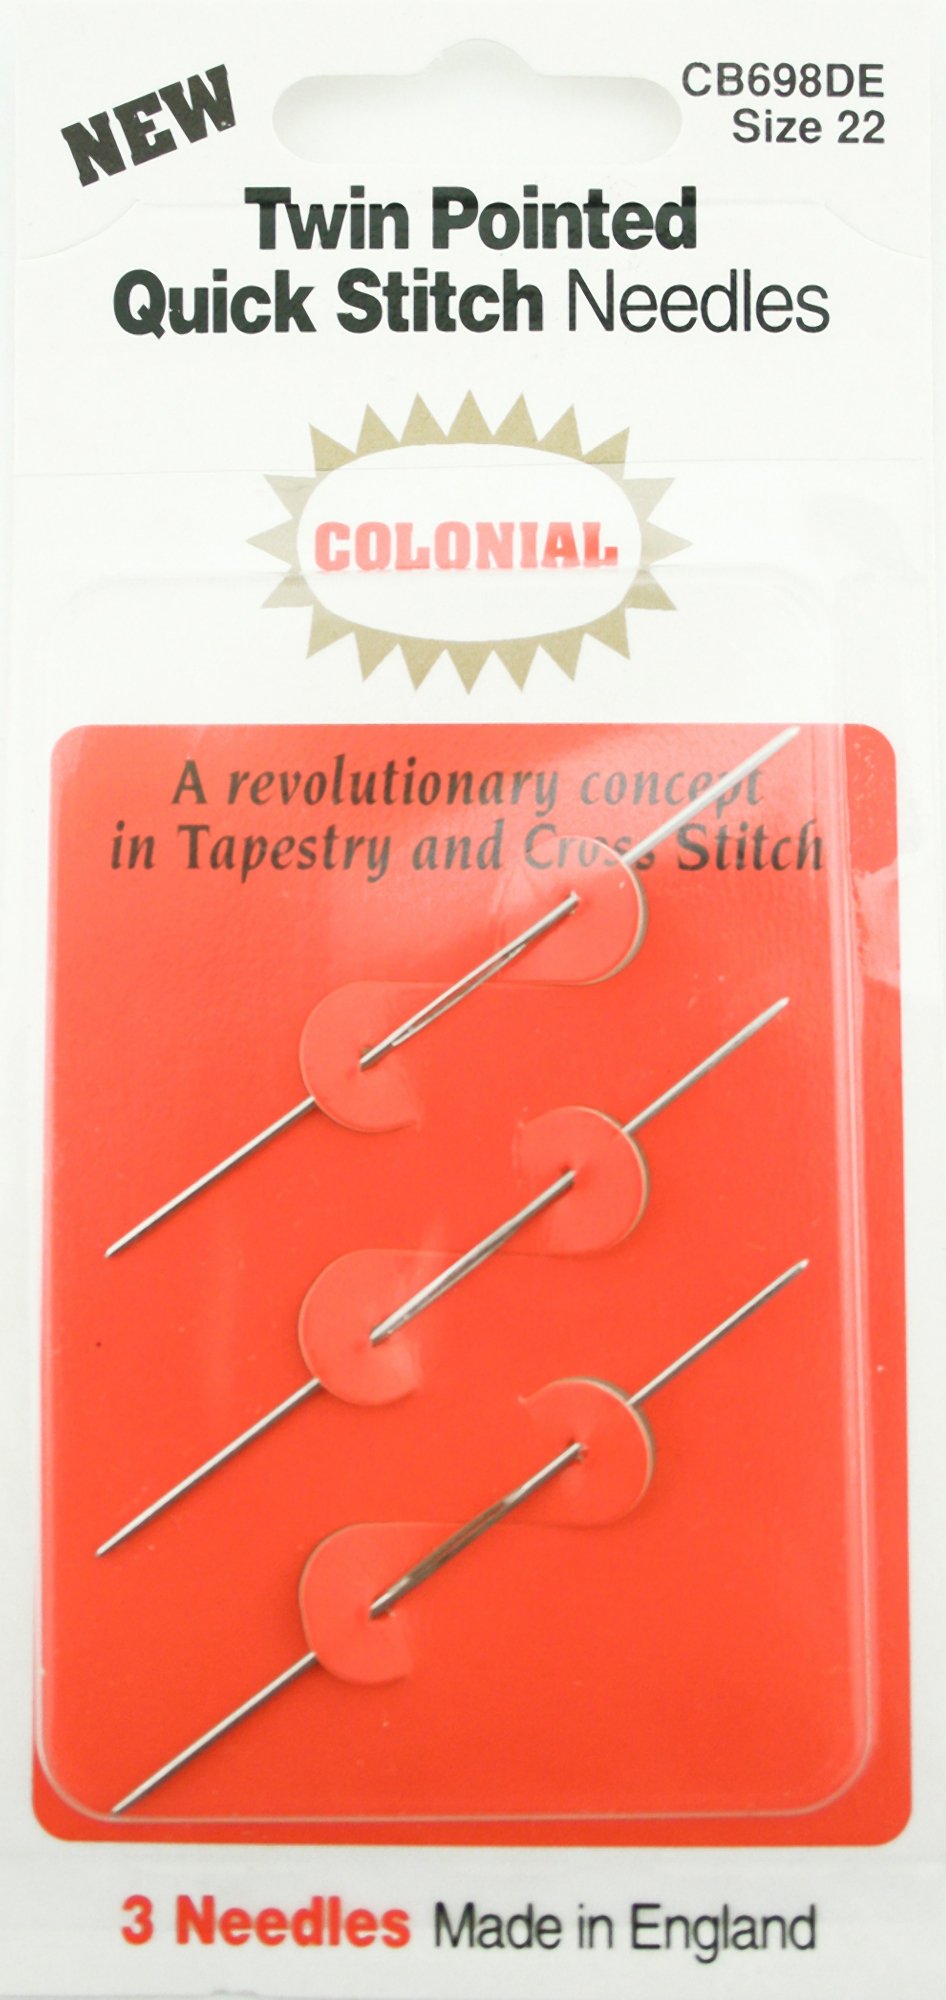 Tapestry or Cross Stitch Needles Size 26 from John James